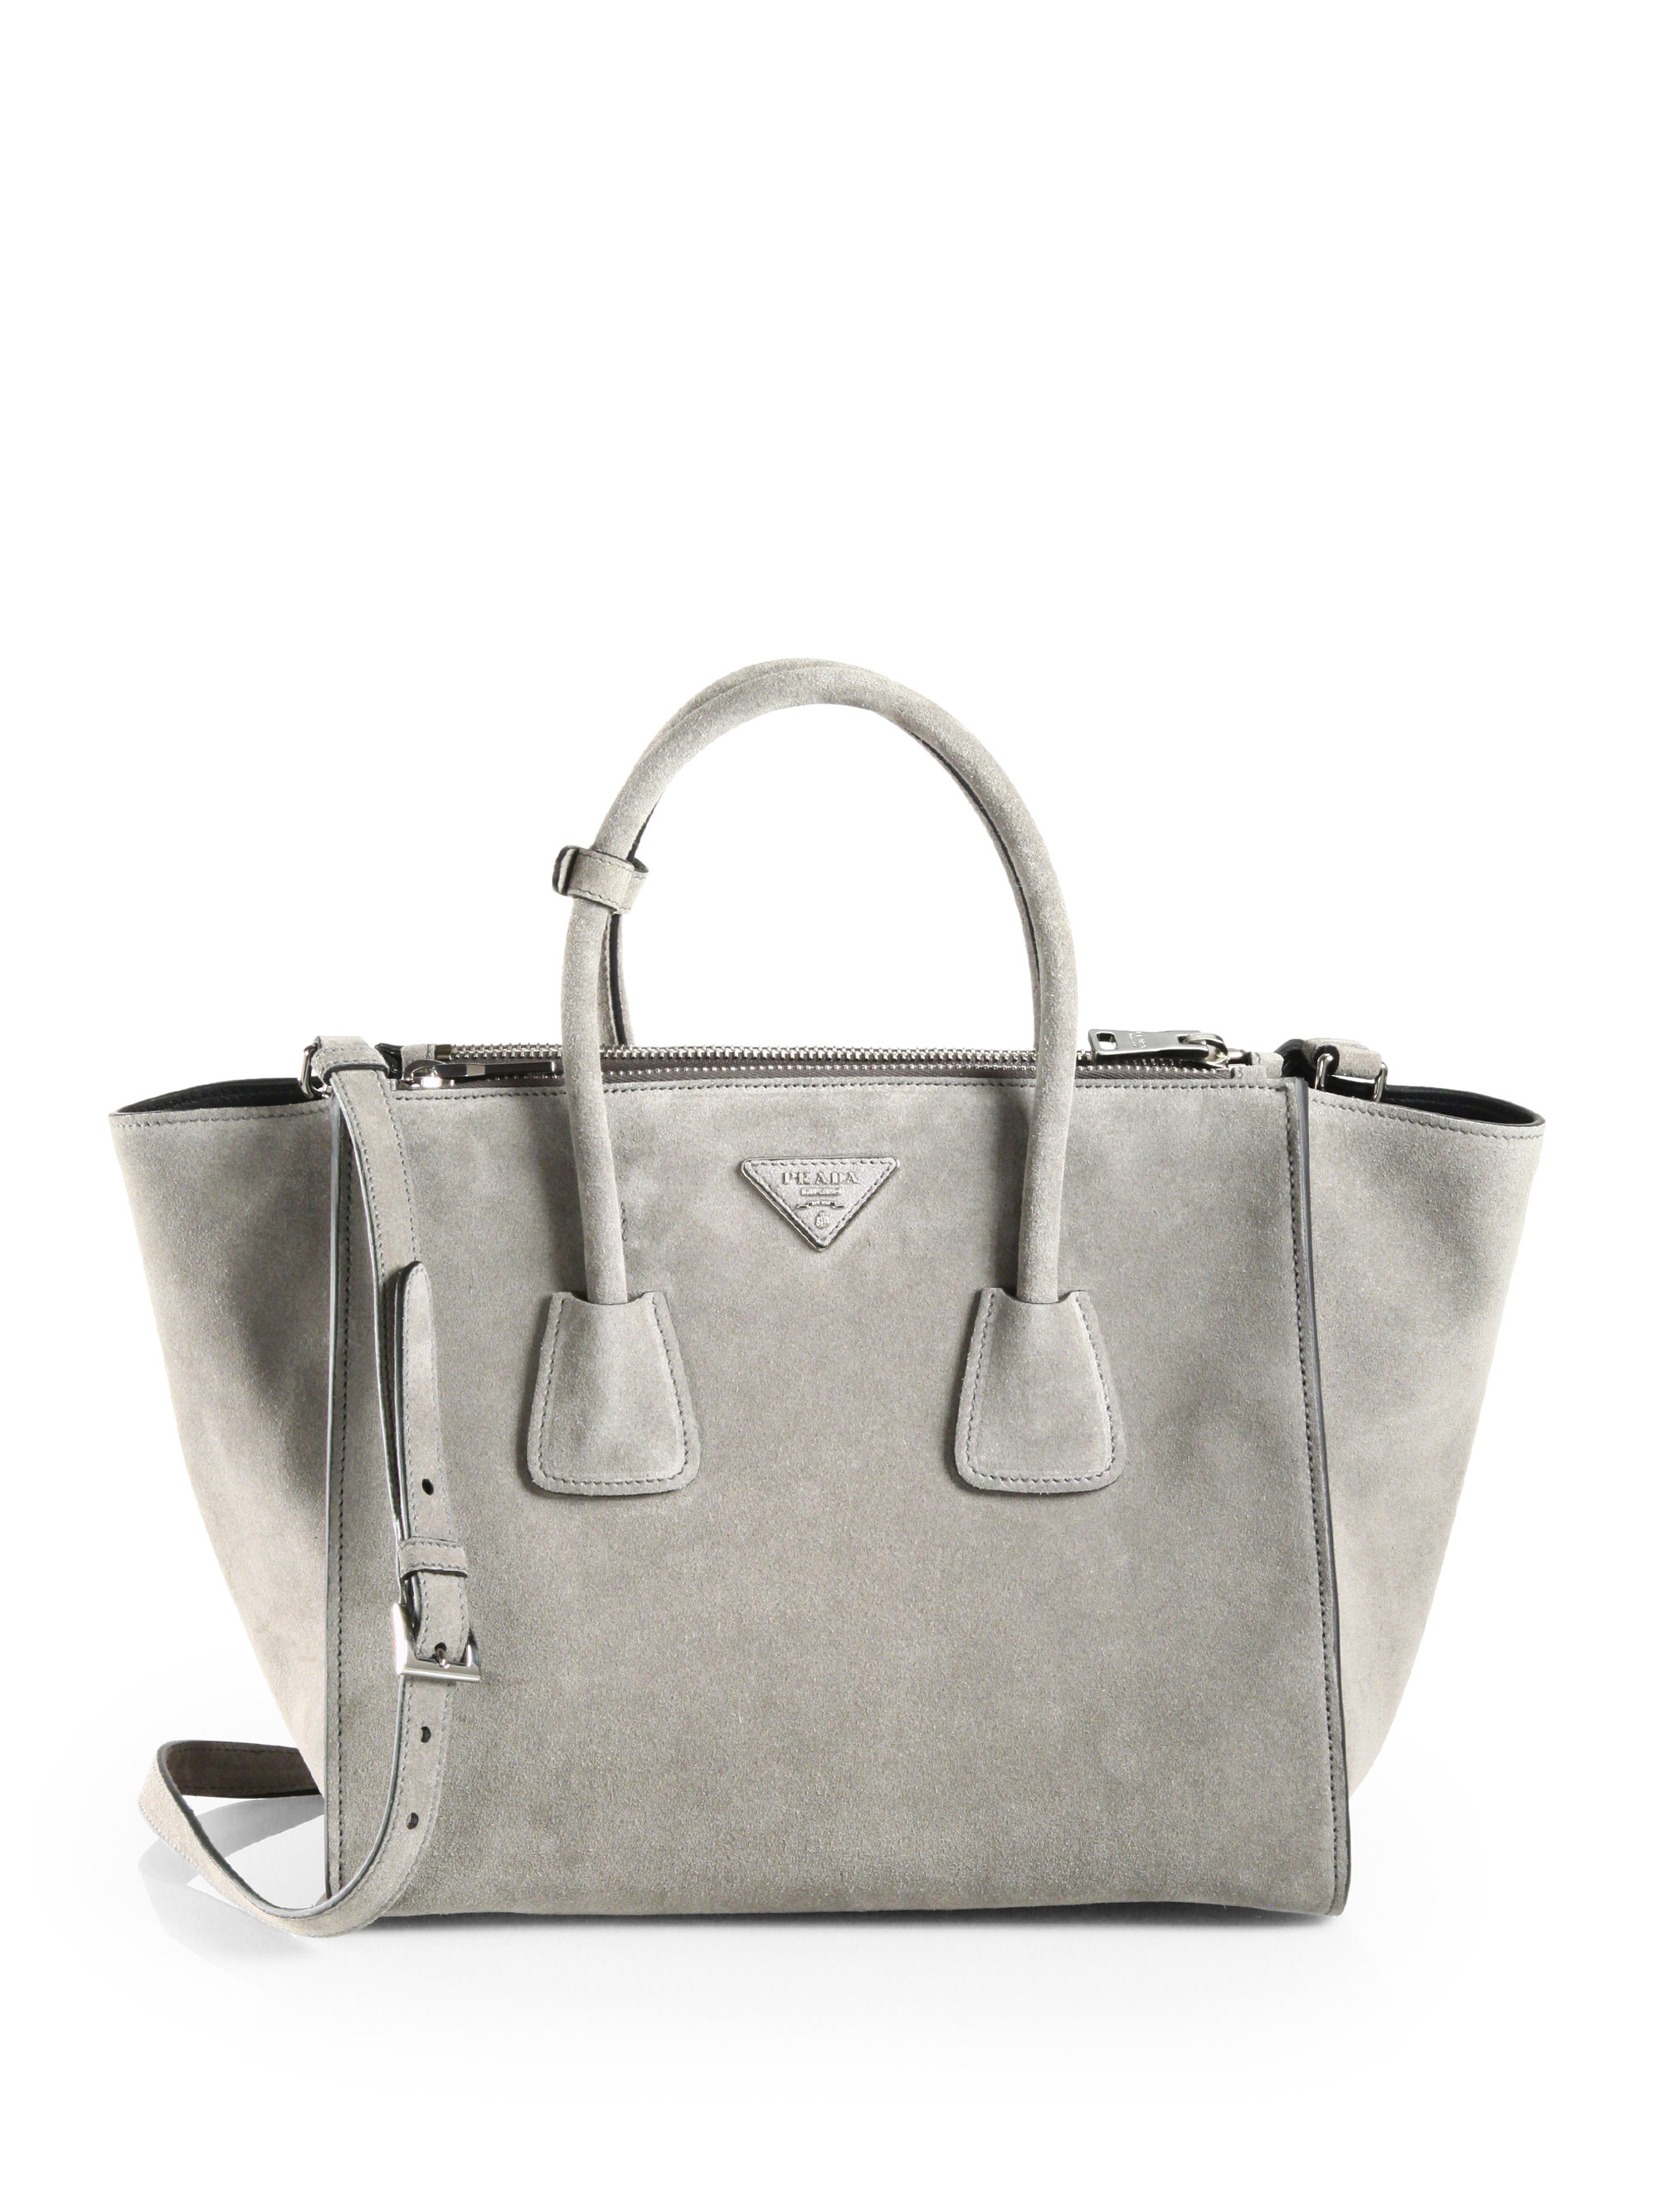 Prada Suede Twin Pocket Tote in Gray | Lyst